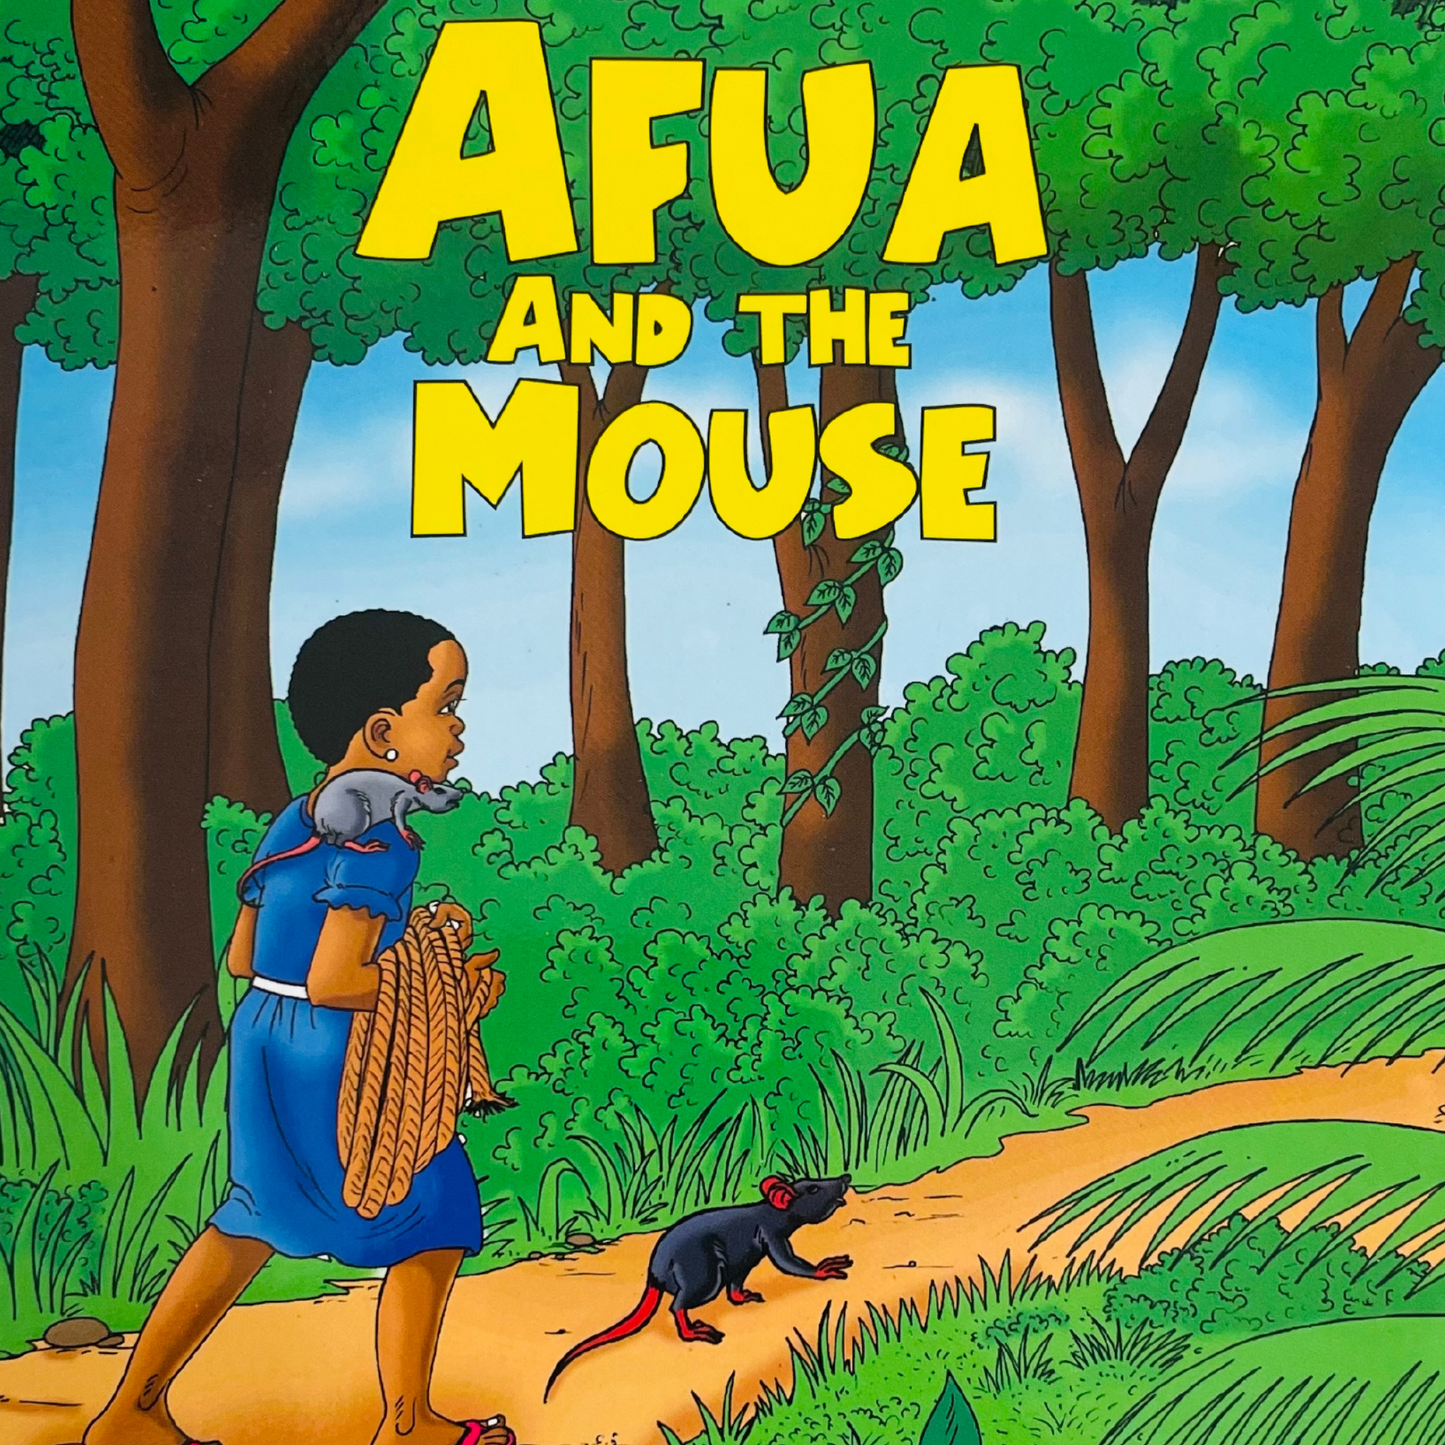 Afua and the mouse